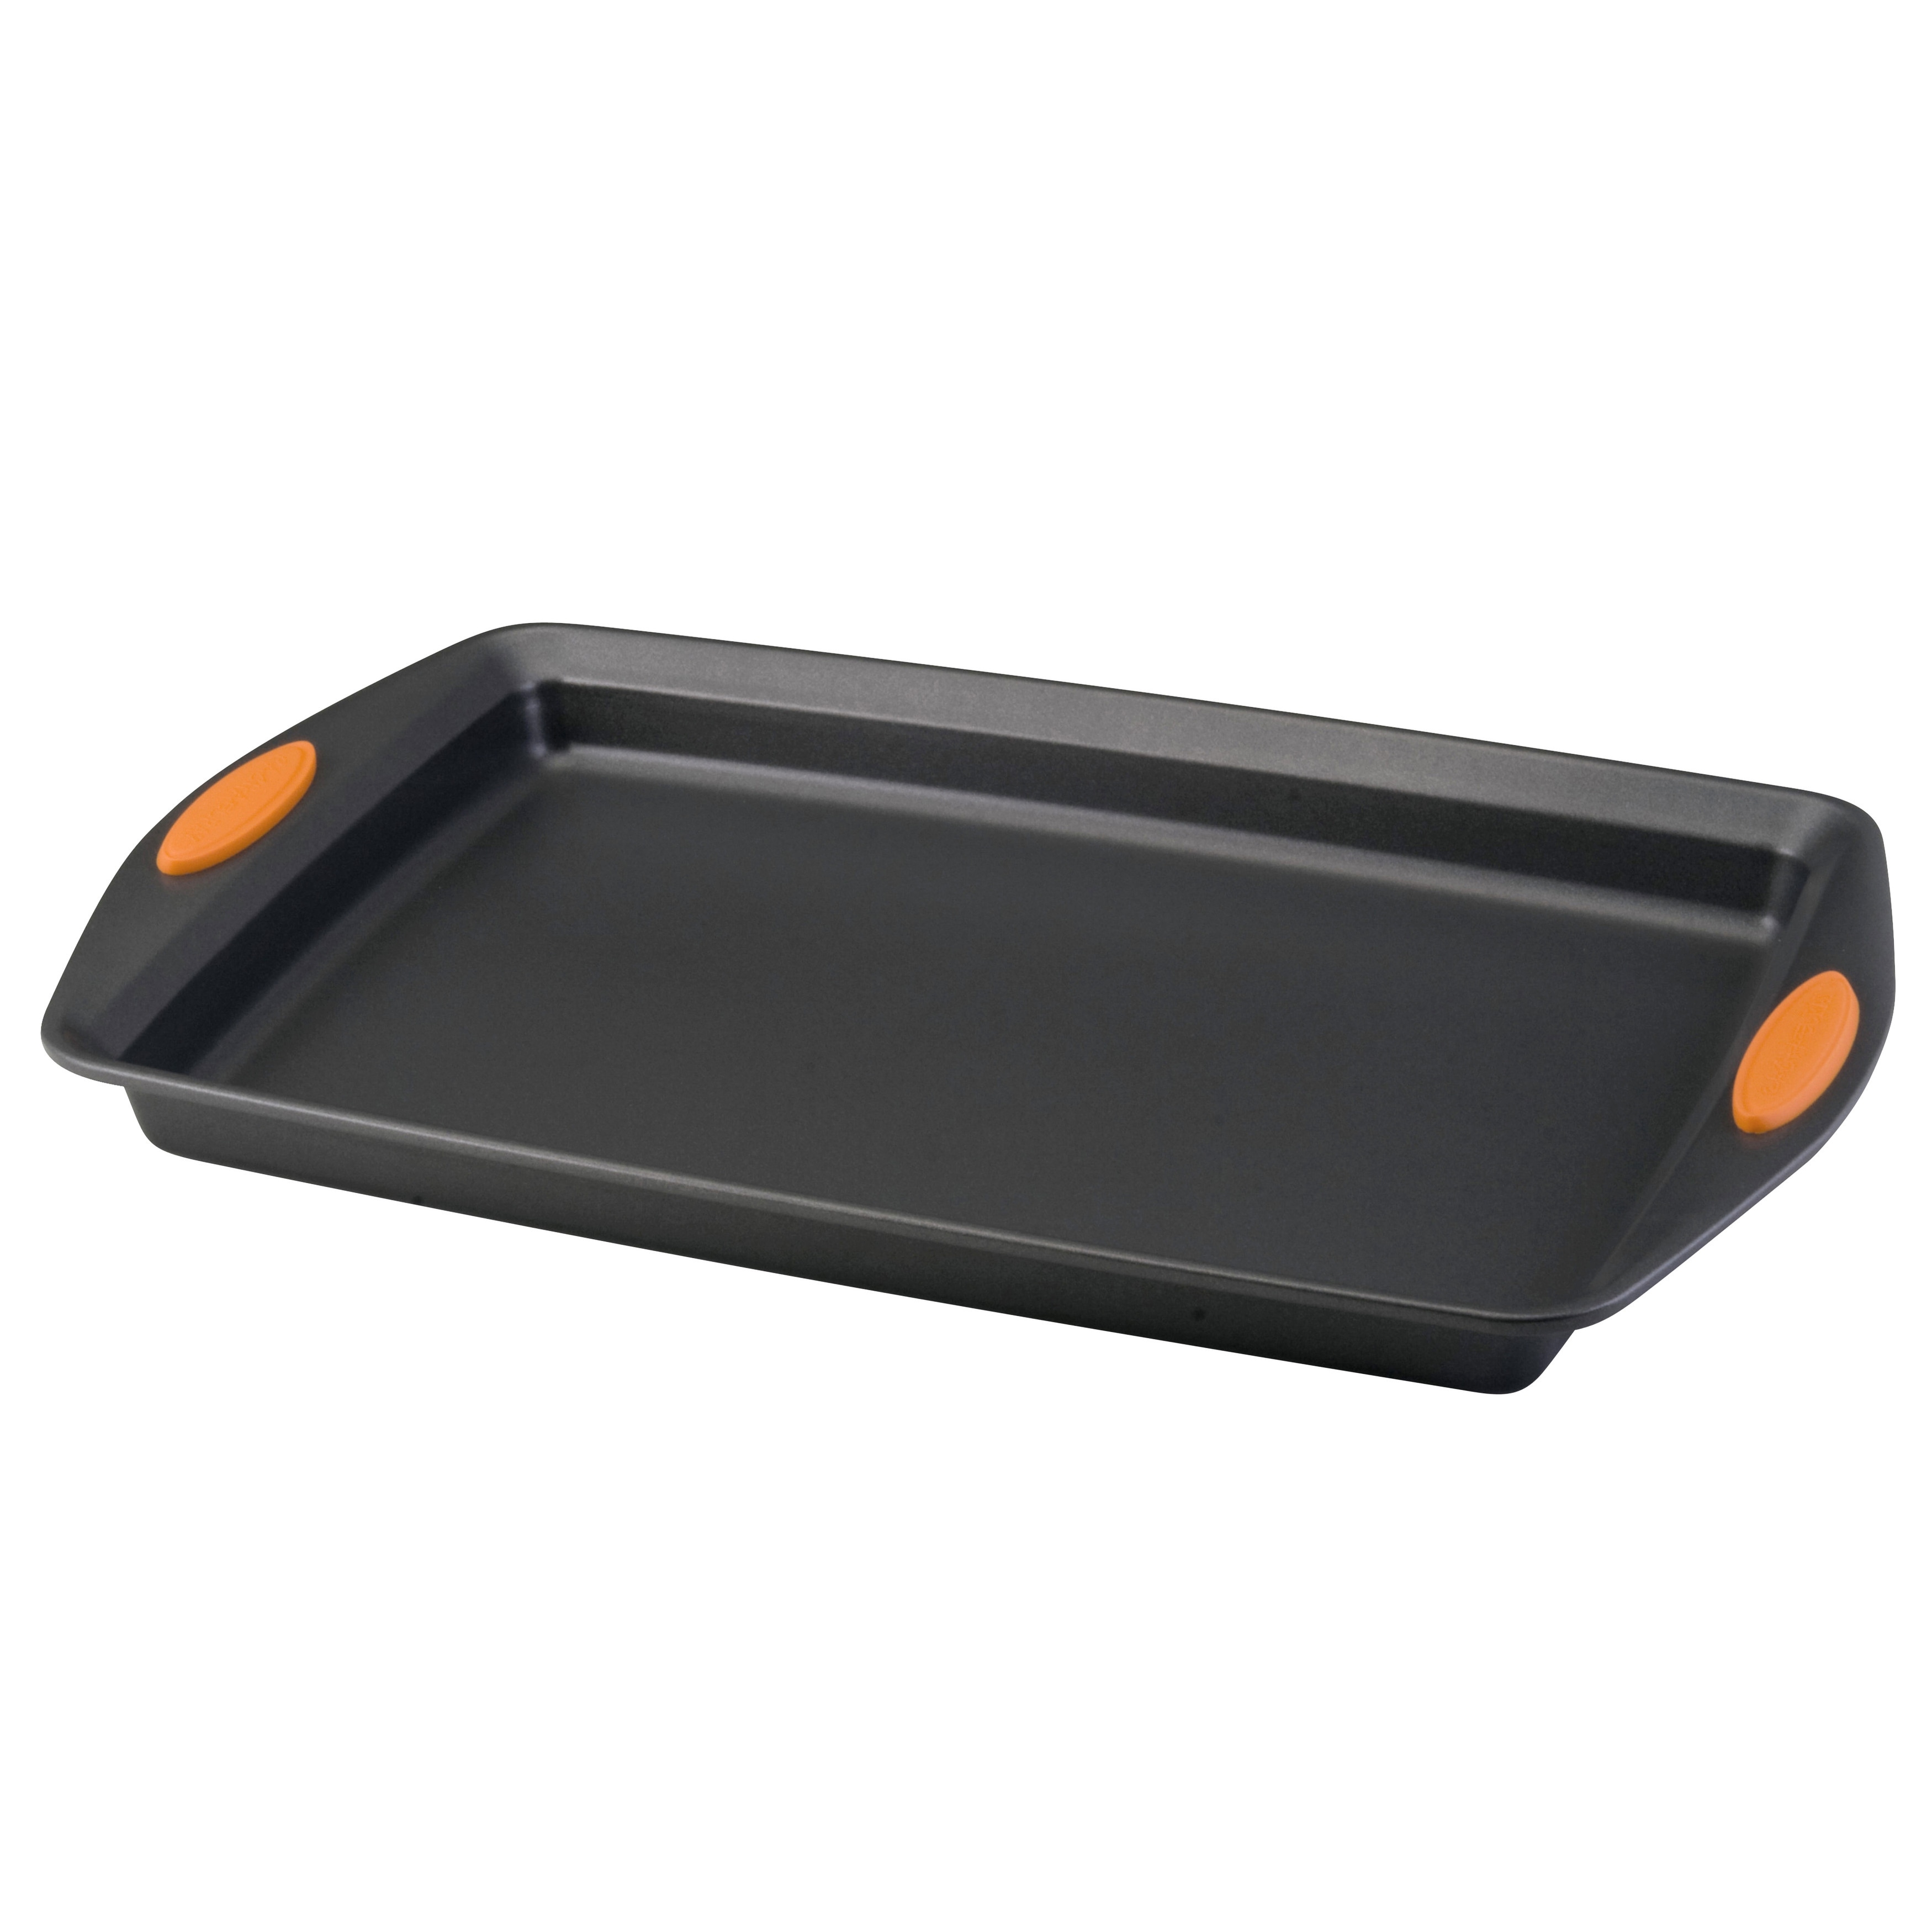 https://ak1.ostkcdn.com/images/products/is/images/direct/fdac8f8af82779d437bbb2f5b6bf22b01fc0c398/Rachael-Ray-Bakeware-Cookie-Sheet-Loaf-Pan-%26-Utensil-4PC-Set.jpg